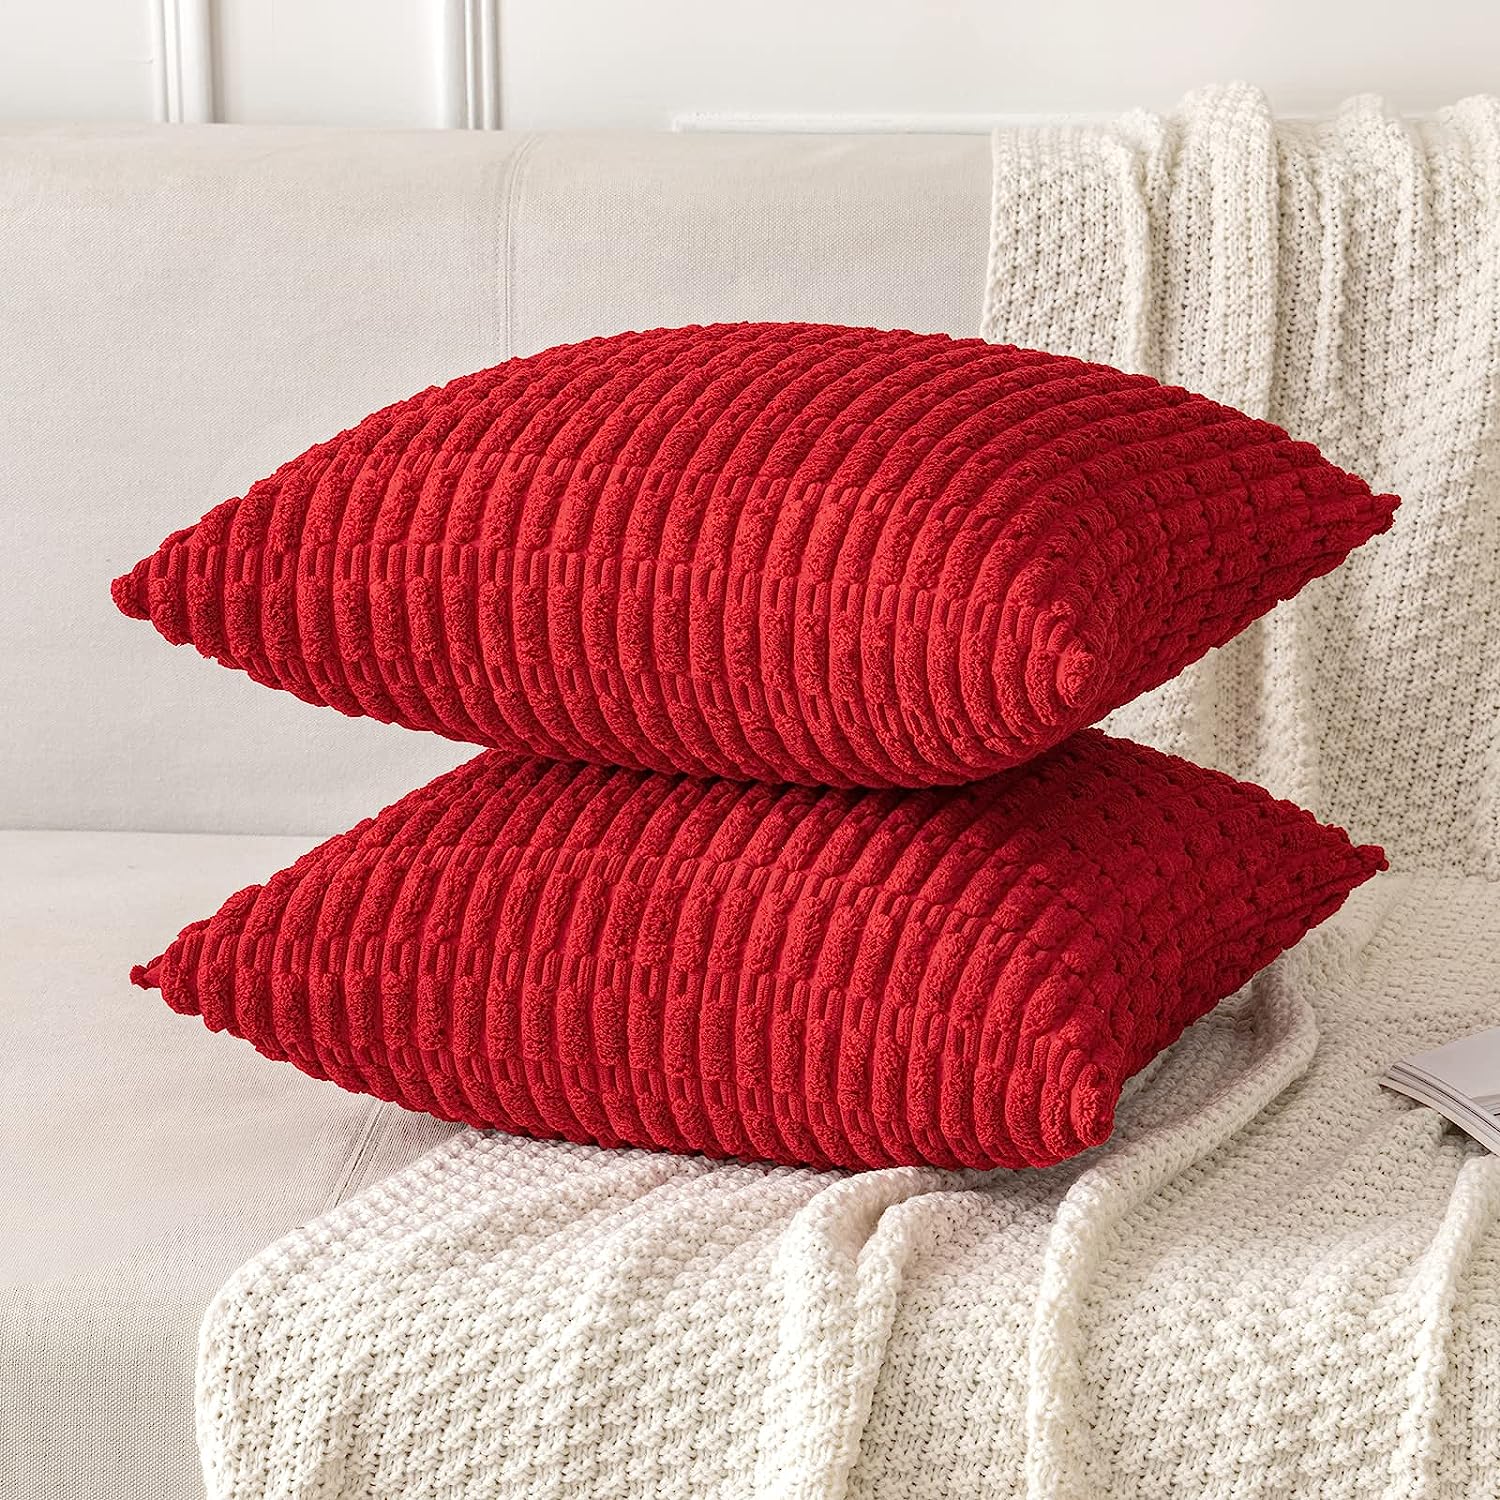 OTOSTAR Pack of 2 Corduroy Soft Decorative Throw Pillow Covers